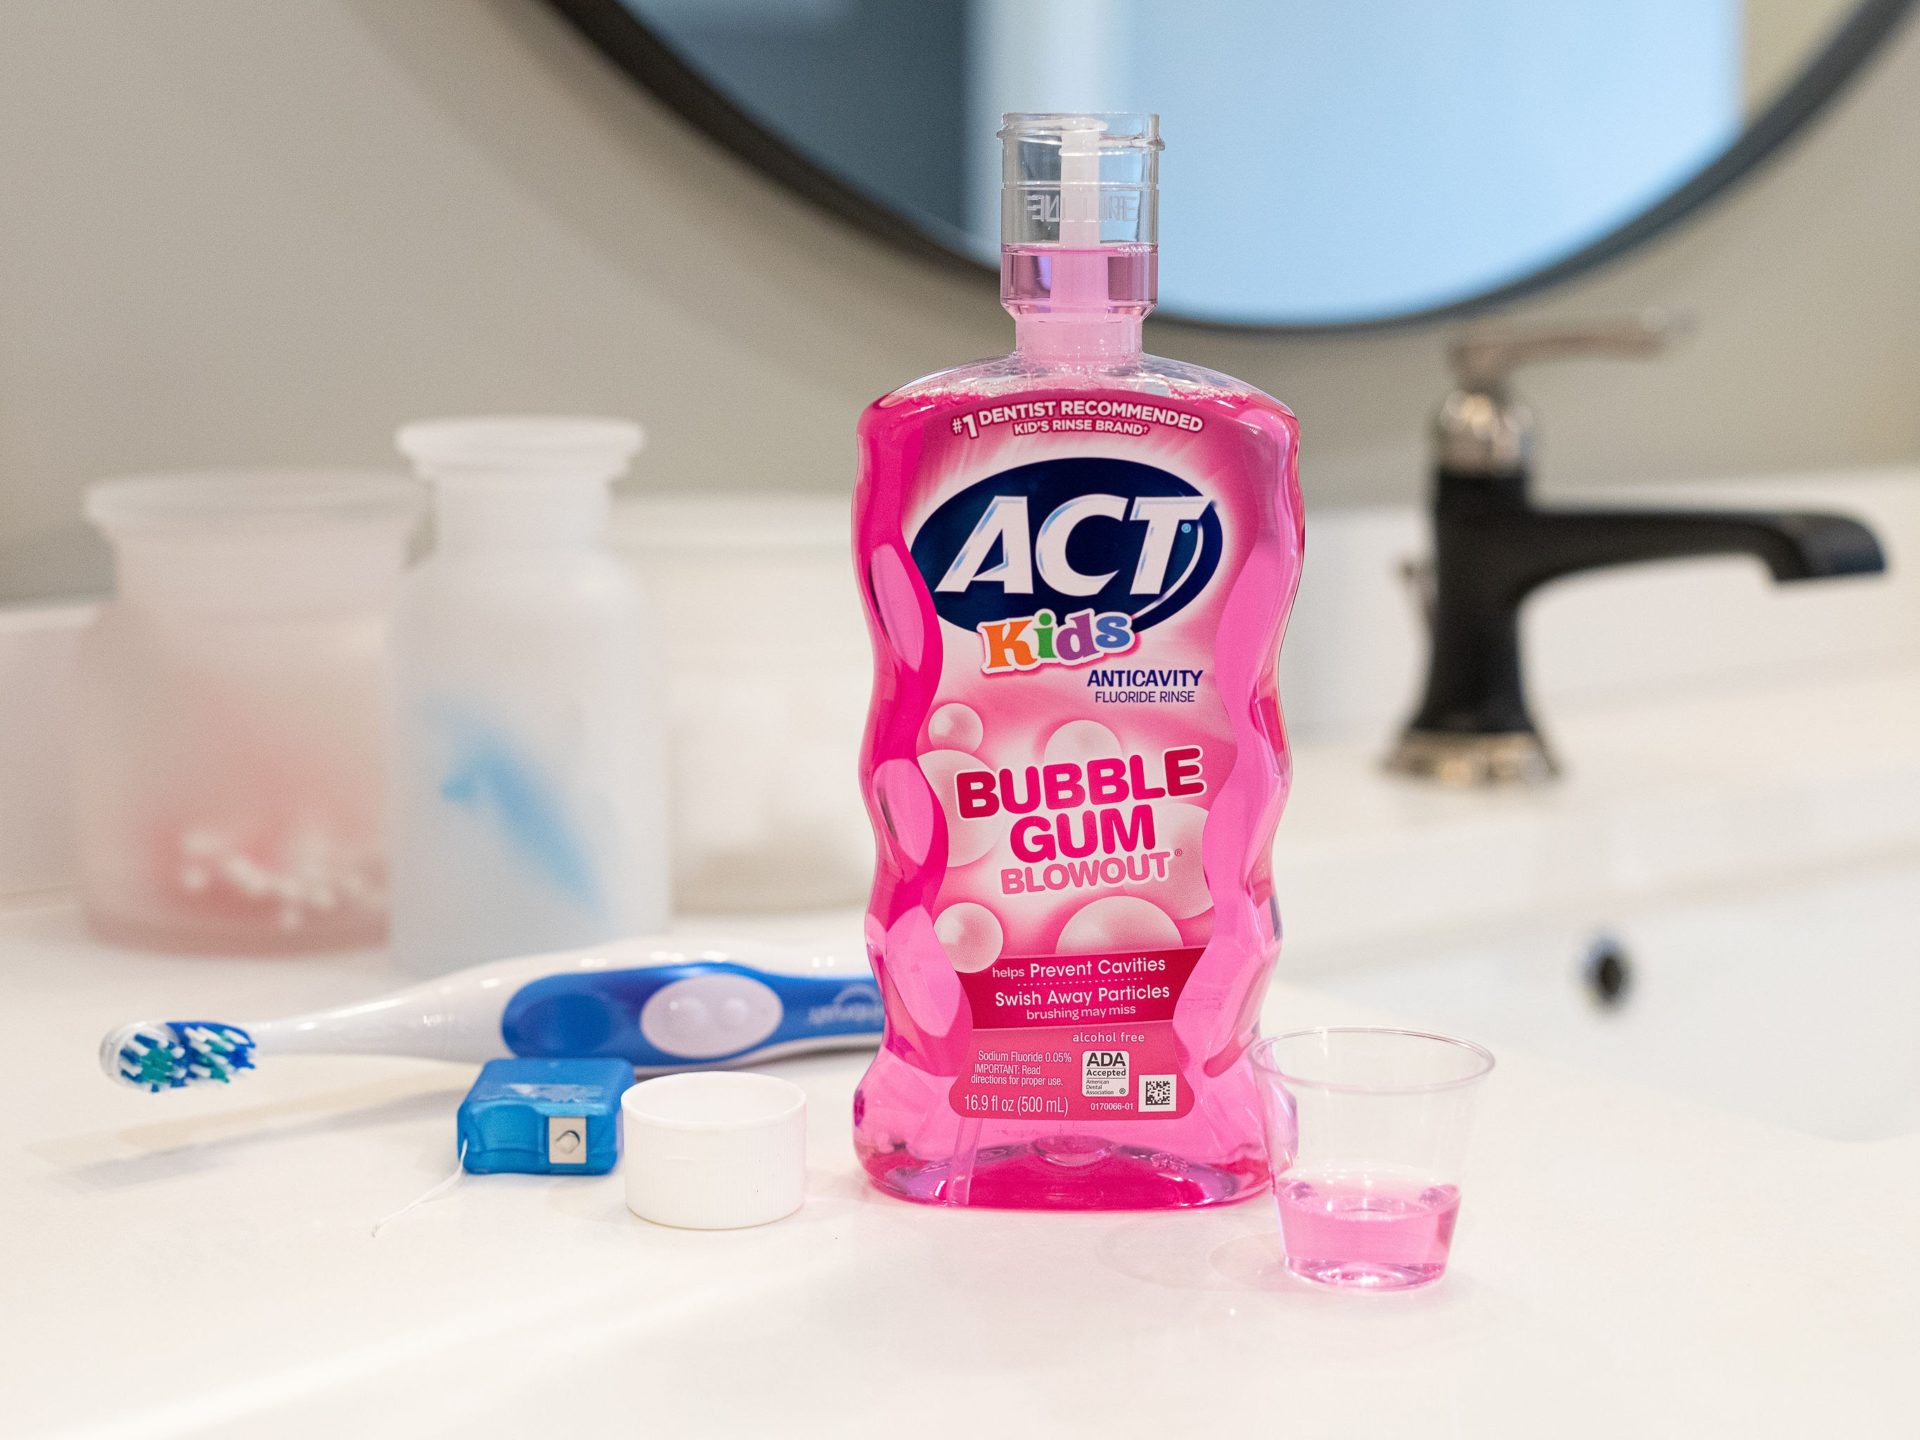 Act Mouthwash As Low As $3.49 At Kroger